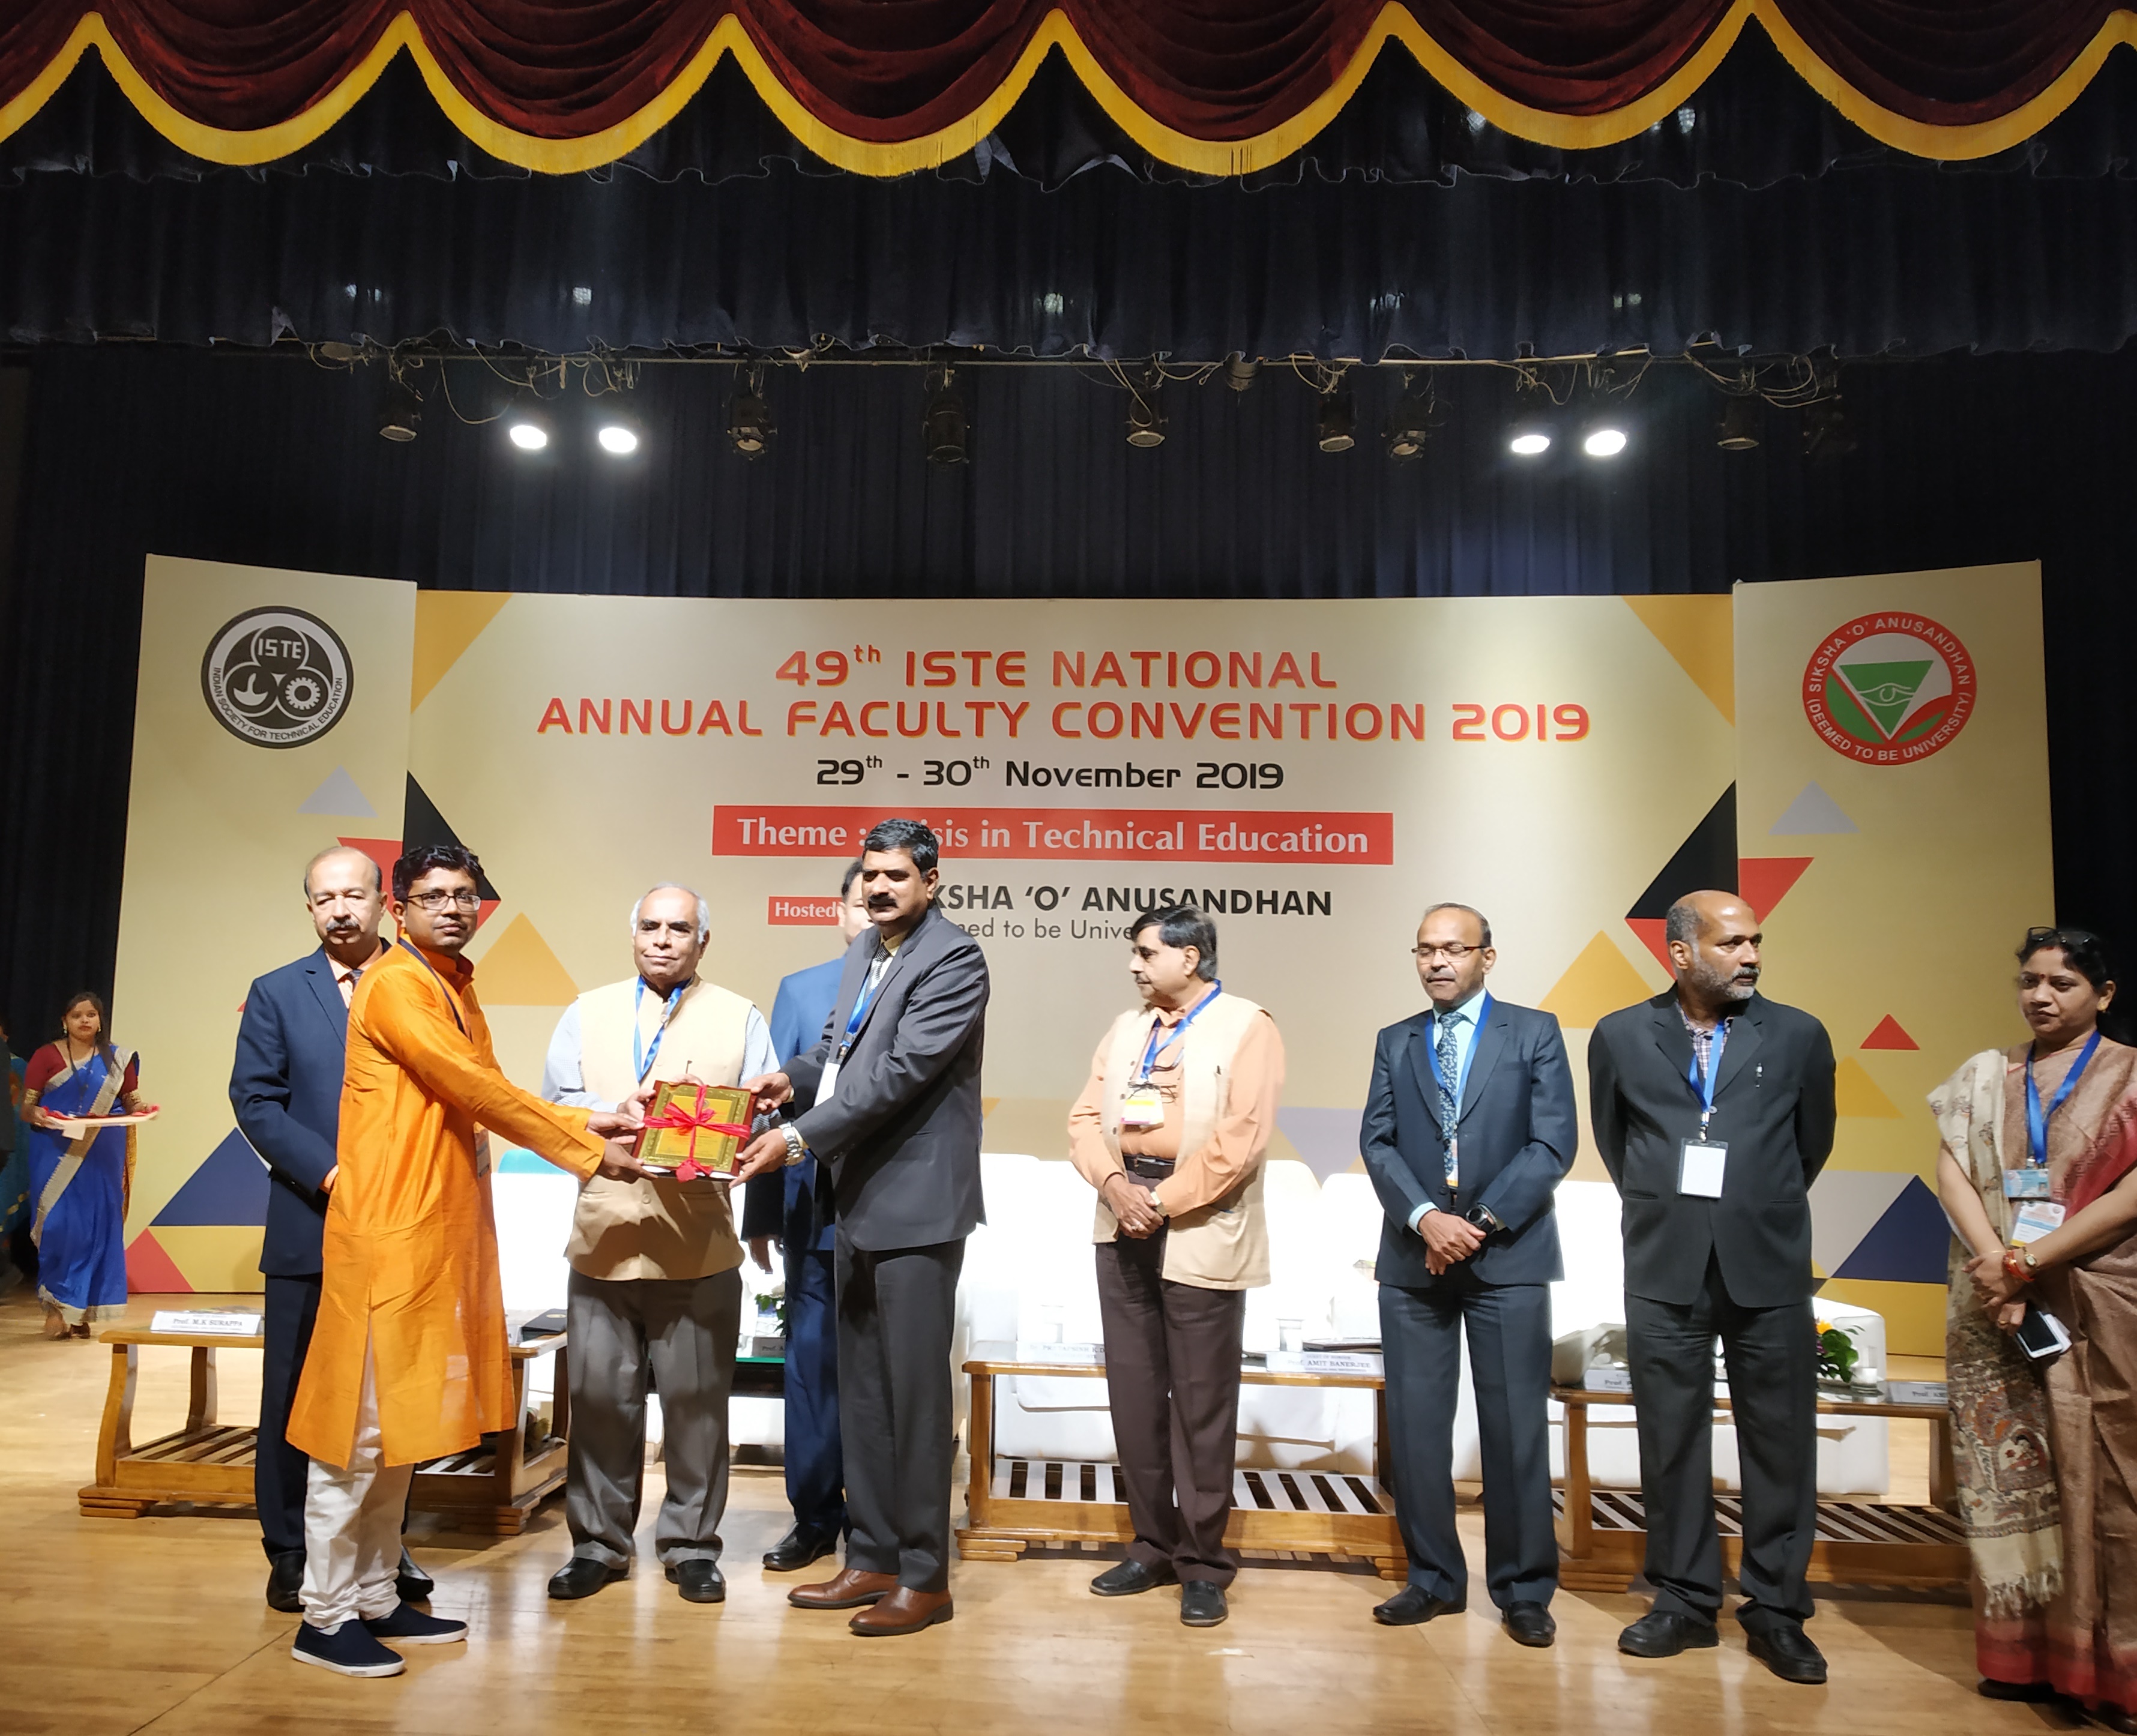 ISTE FACULTY CHAPTER AWARD 2019 ON 1ST RANK IN GUJARAT SECTION